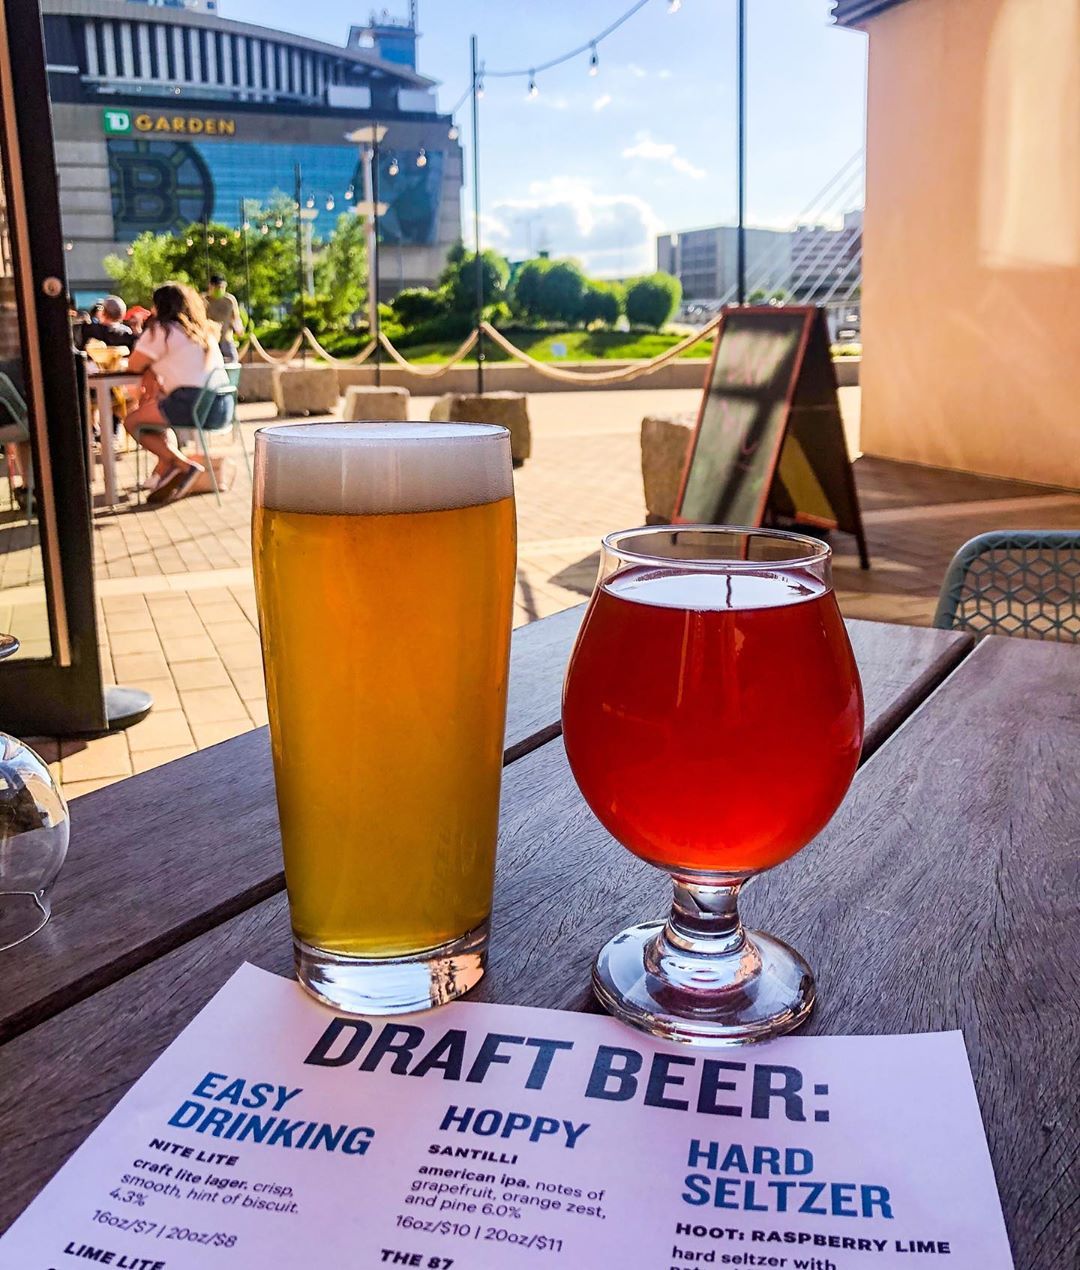 Night Shift Brewing Launches Garden Party Pilsner – Now Pouring At Lovejoy  Wharf and Everett Taprooms